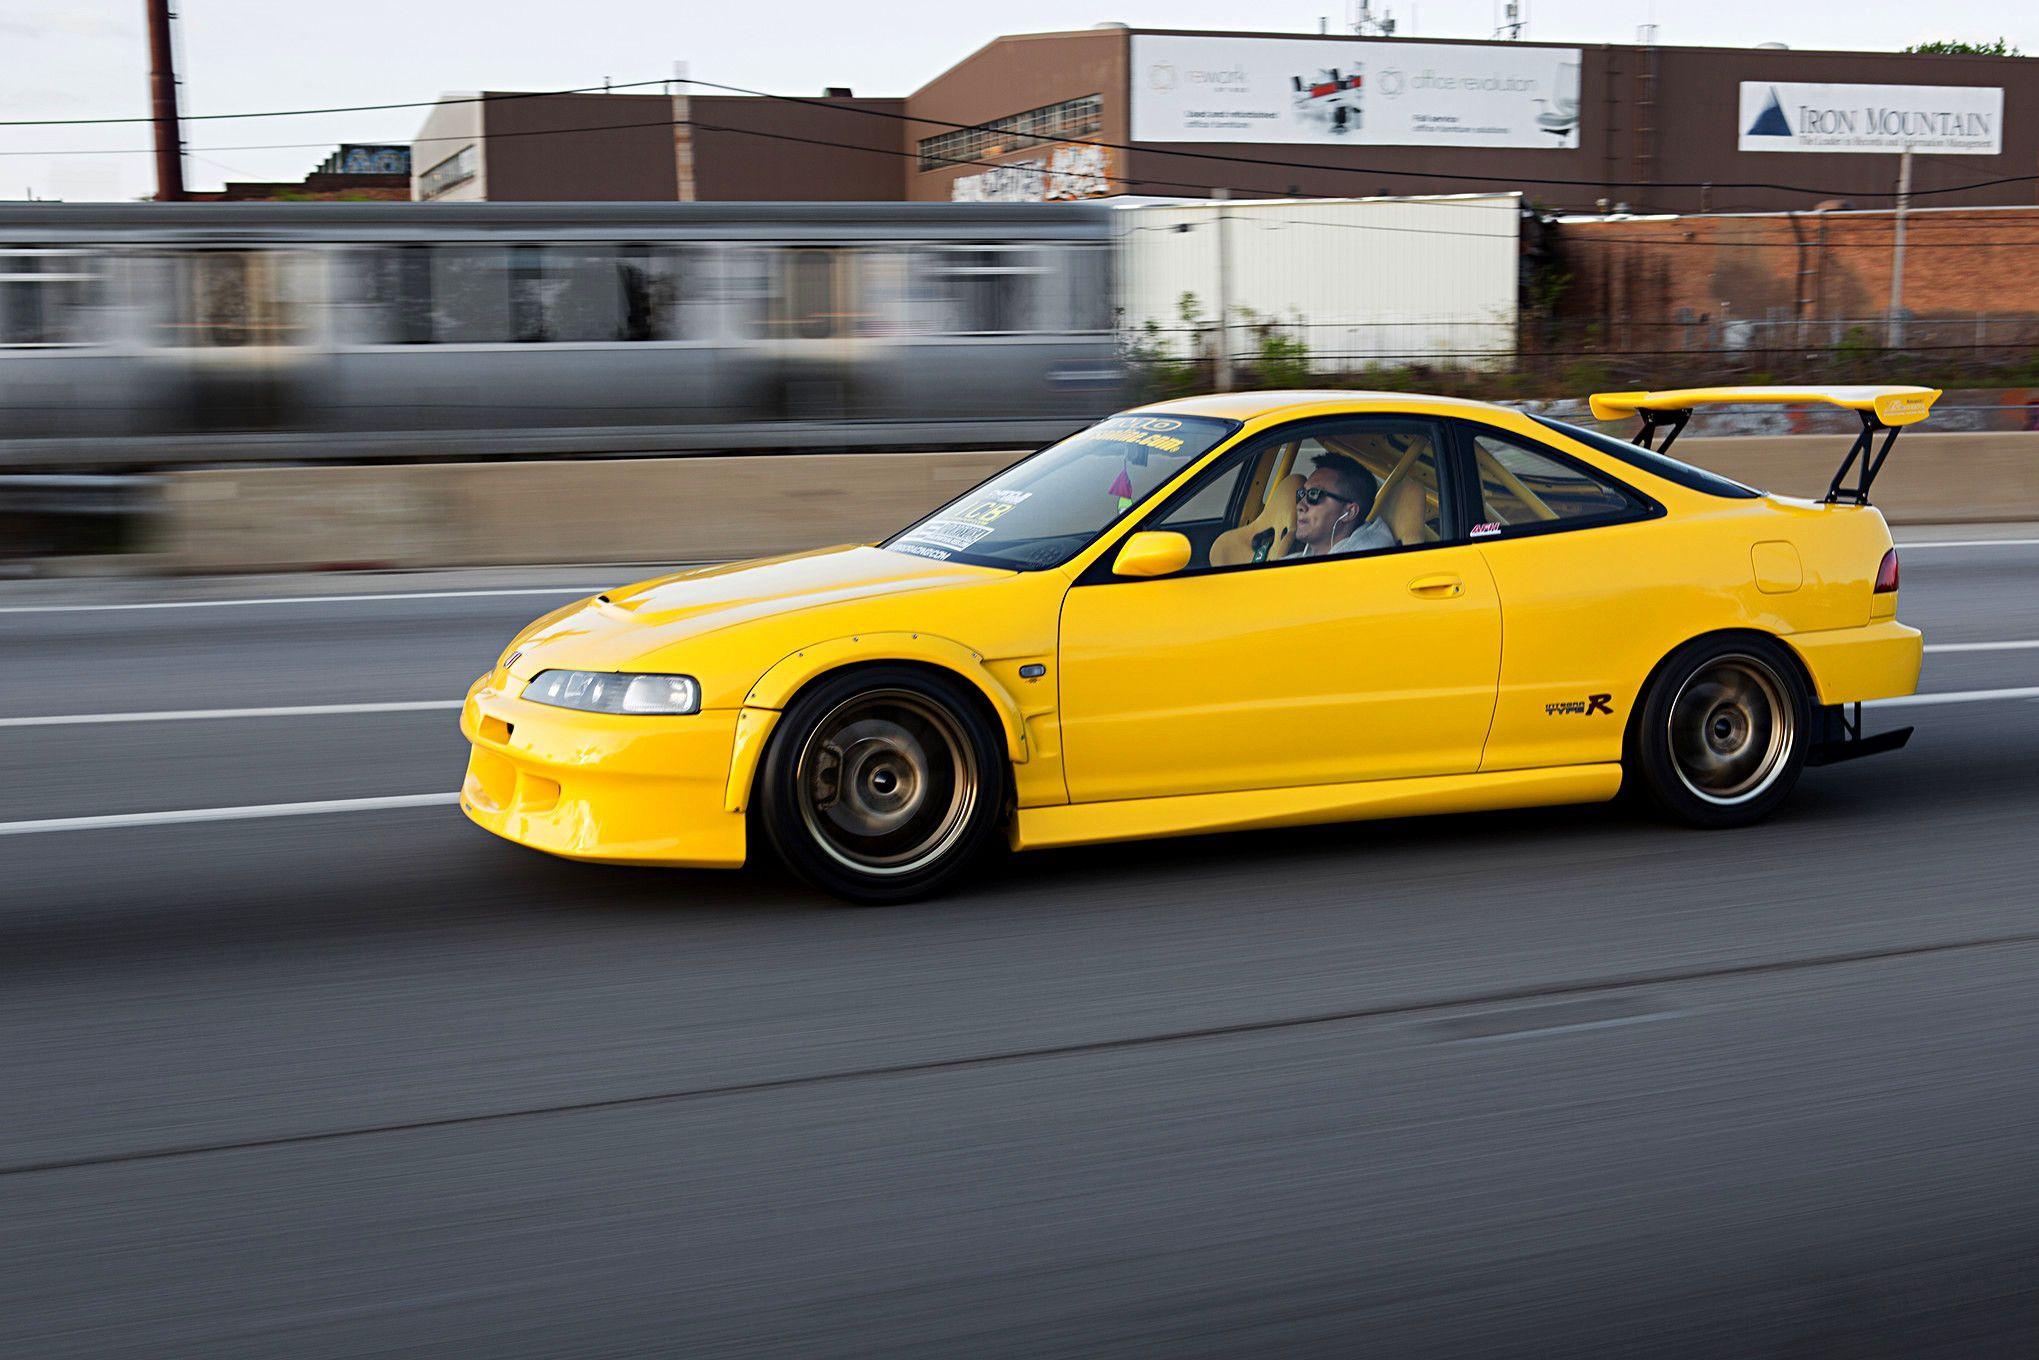 Chen Huang's 2000 Acura Integra Type R Photo & Image Gallery